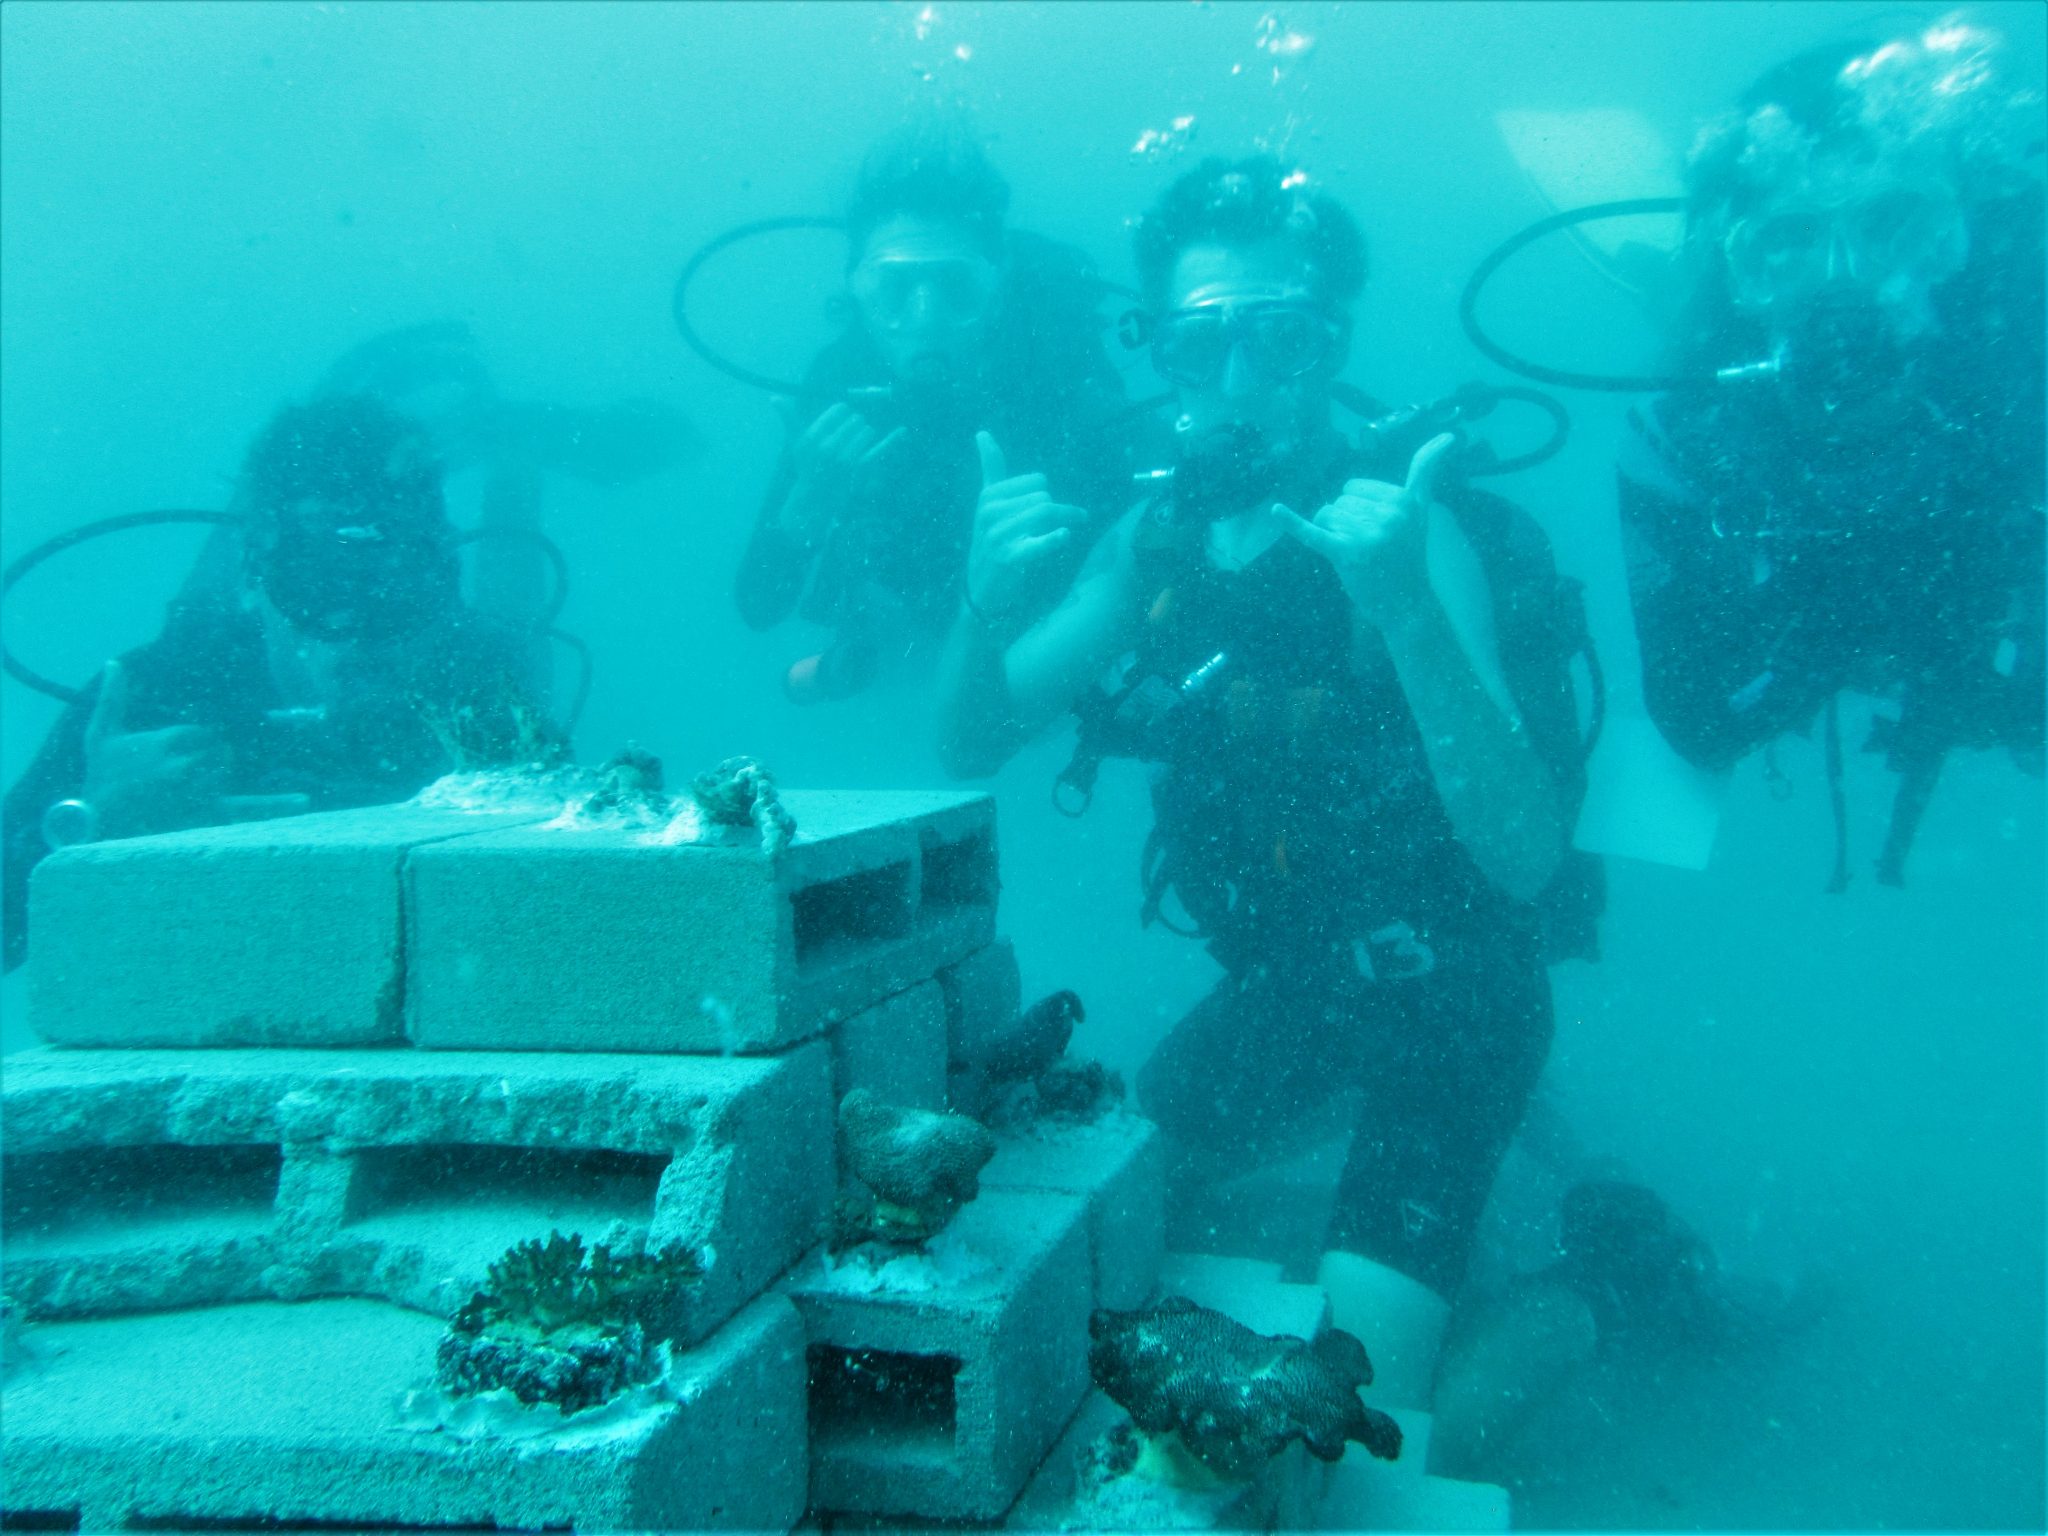 Artificial Reef built by Volunteers - Madagascar Research